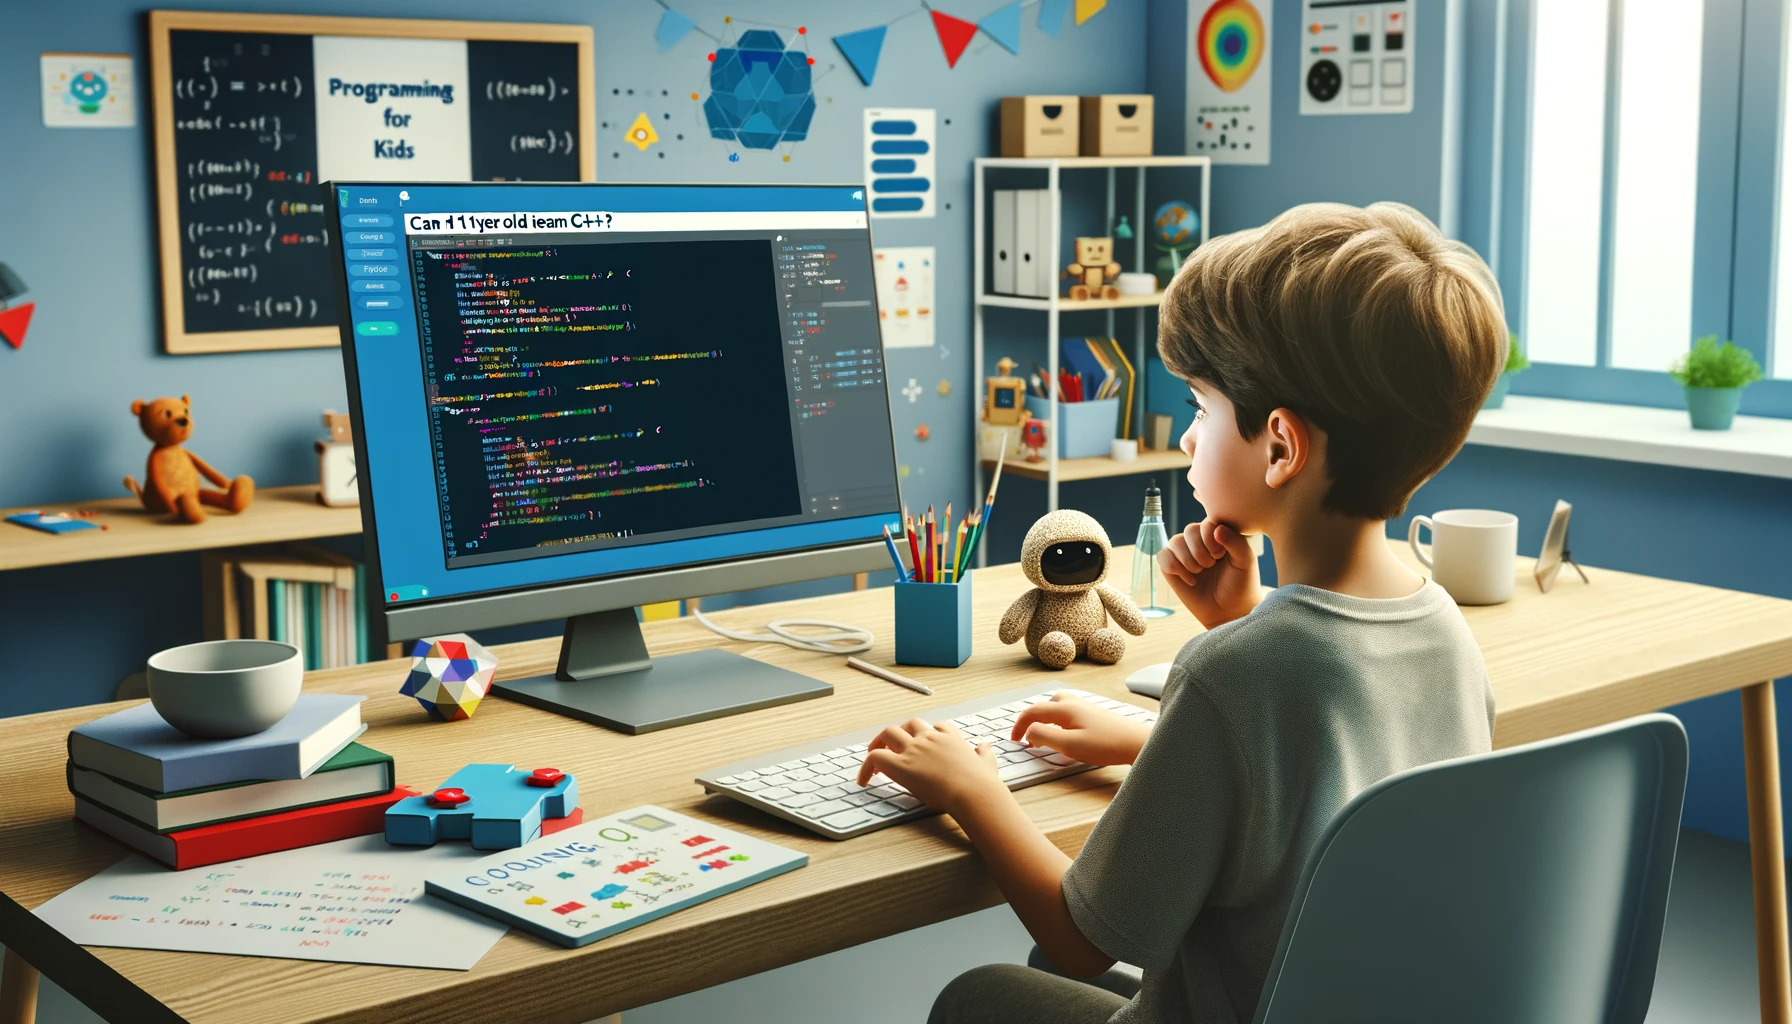 Can a 11 Year Old Learn C++?